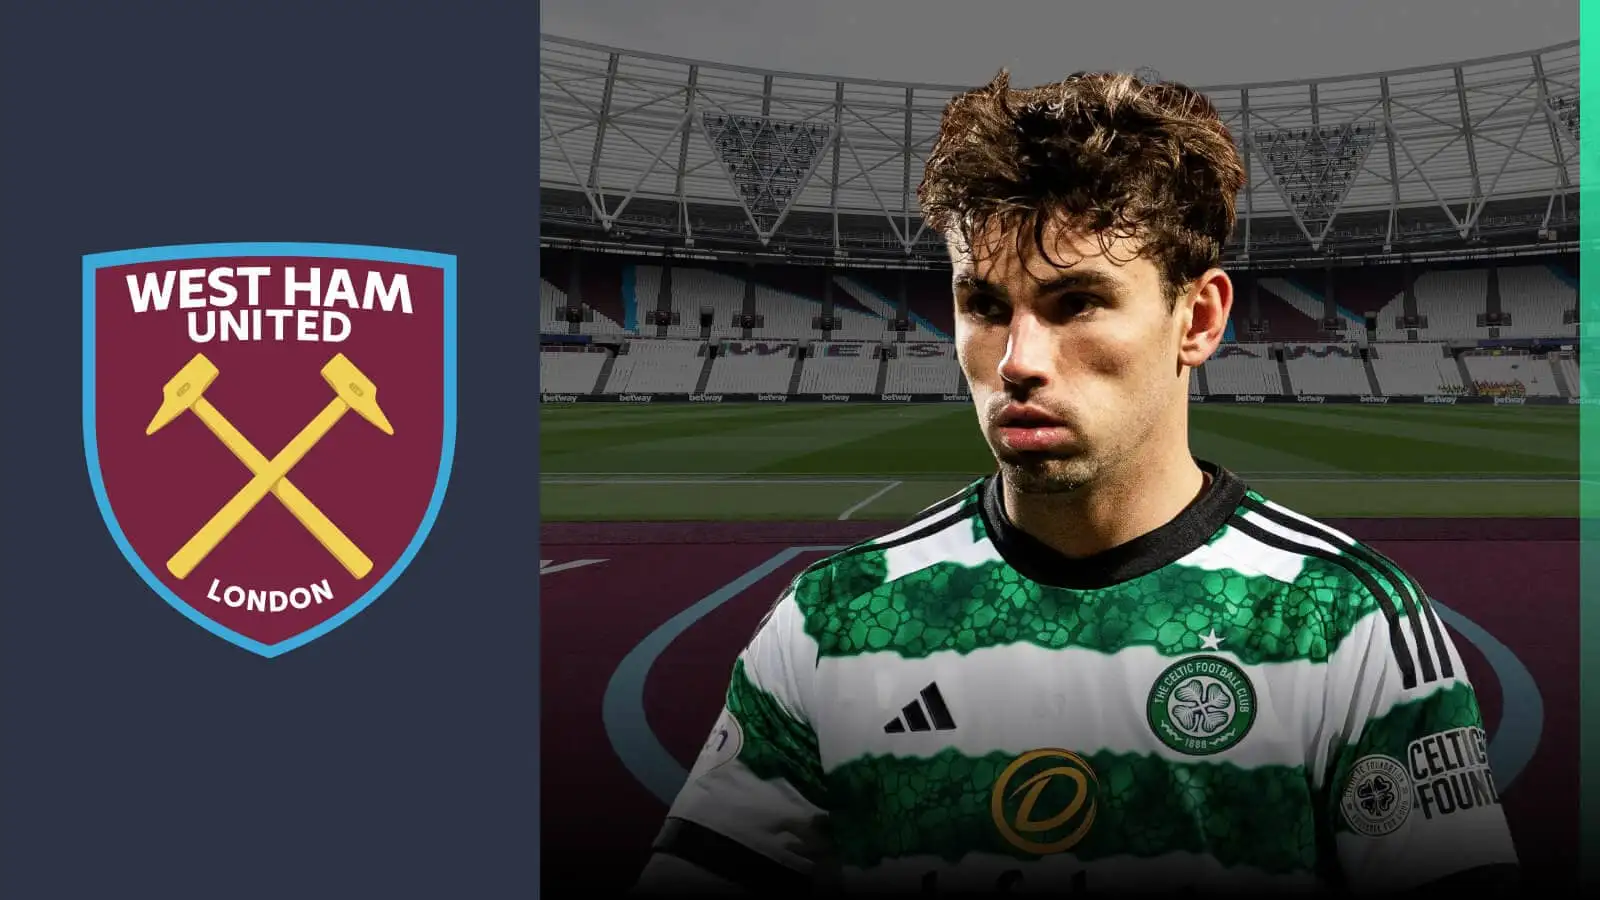 Celtic midfielder tipped for exit amid West Ham links: ‘If someone comes in with a £25m-plus bid, I’d like to think he will be off’